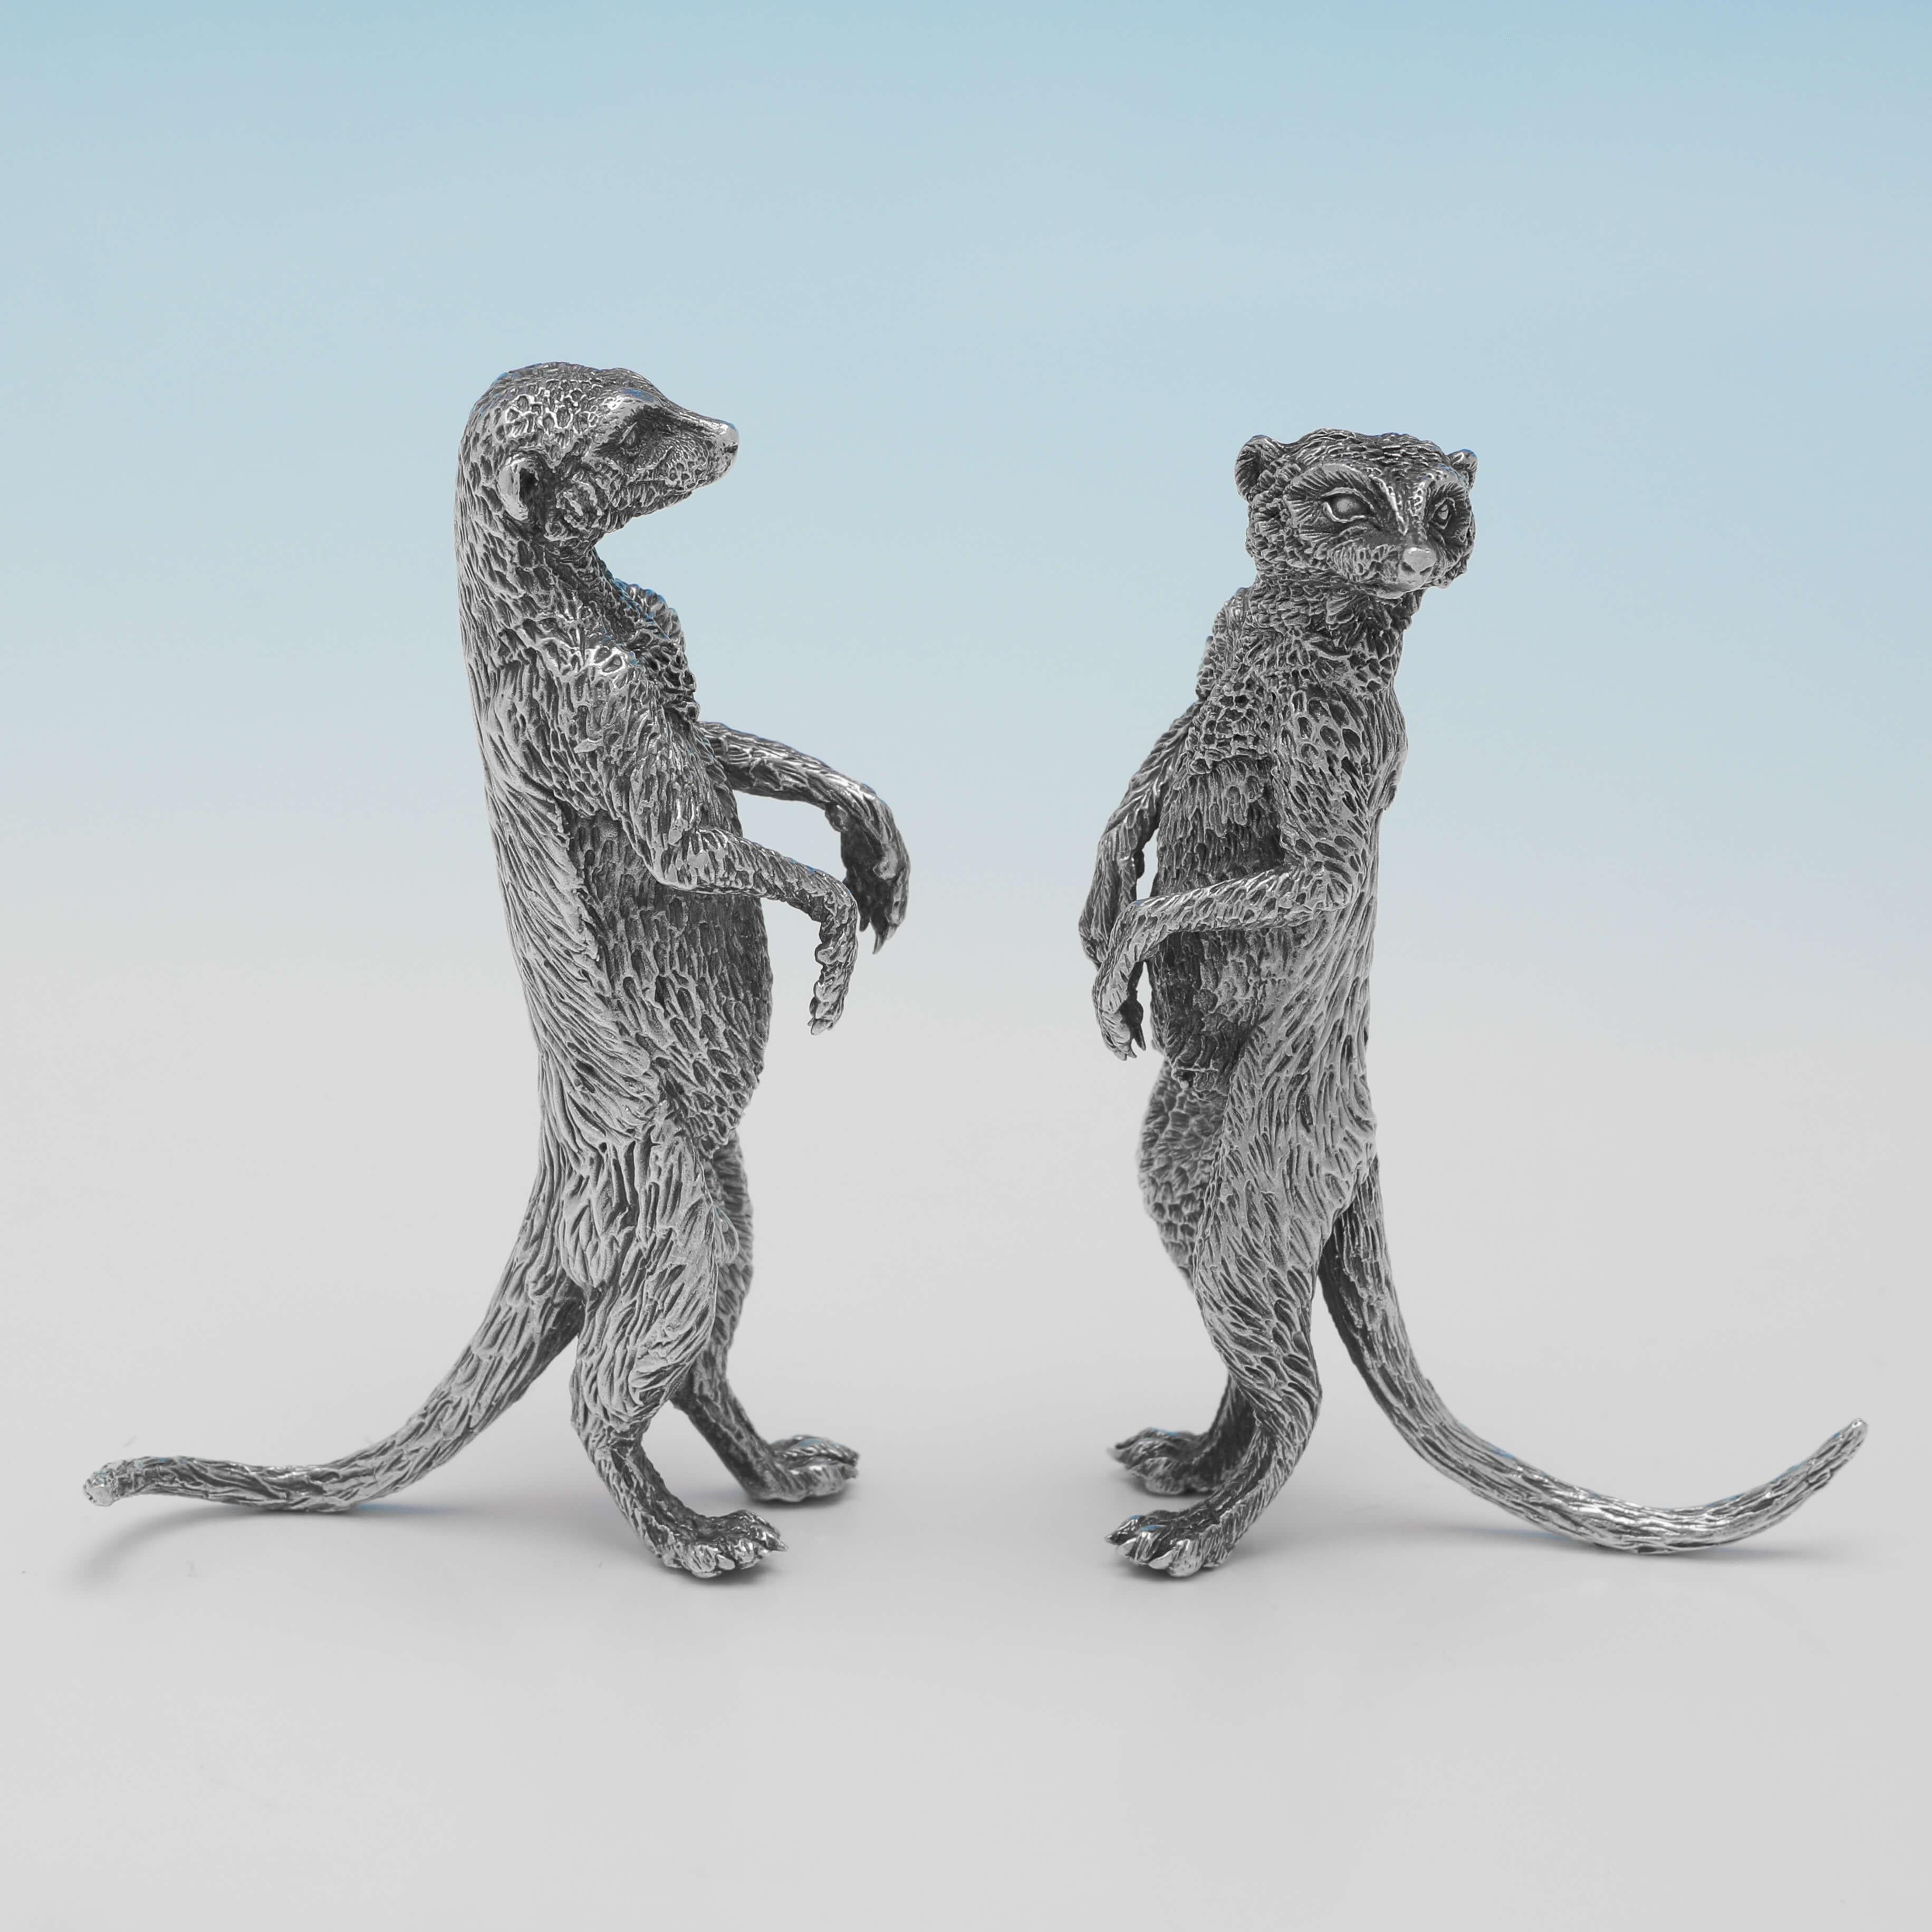 Hallmarked in London in 2002/2003 by Patrick Mavros, this charming family of Sterling Silver Meerkats, are realistically cast. The largest measures 3